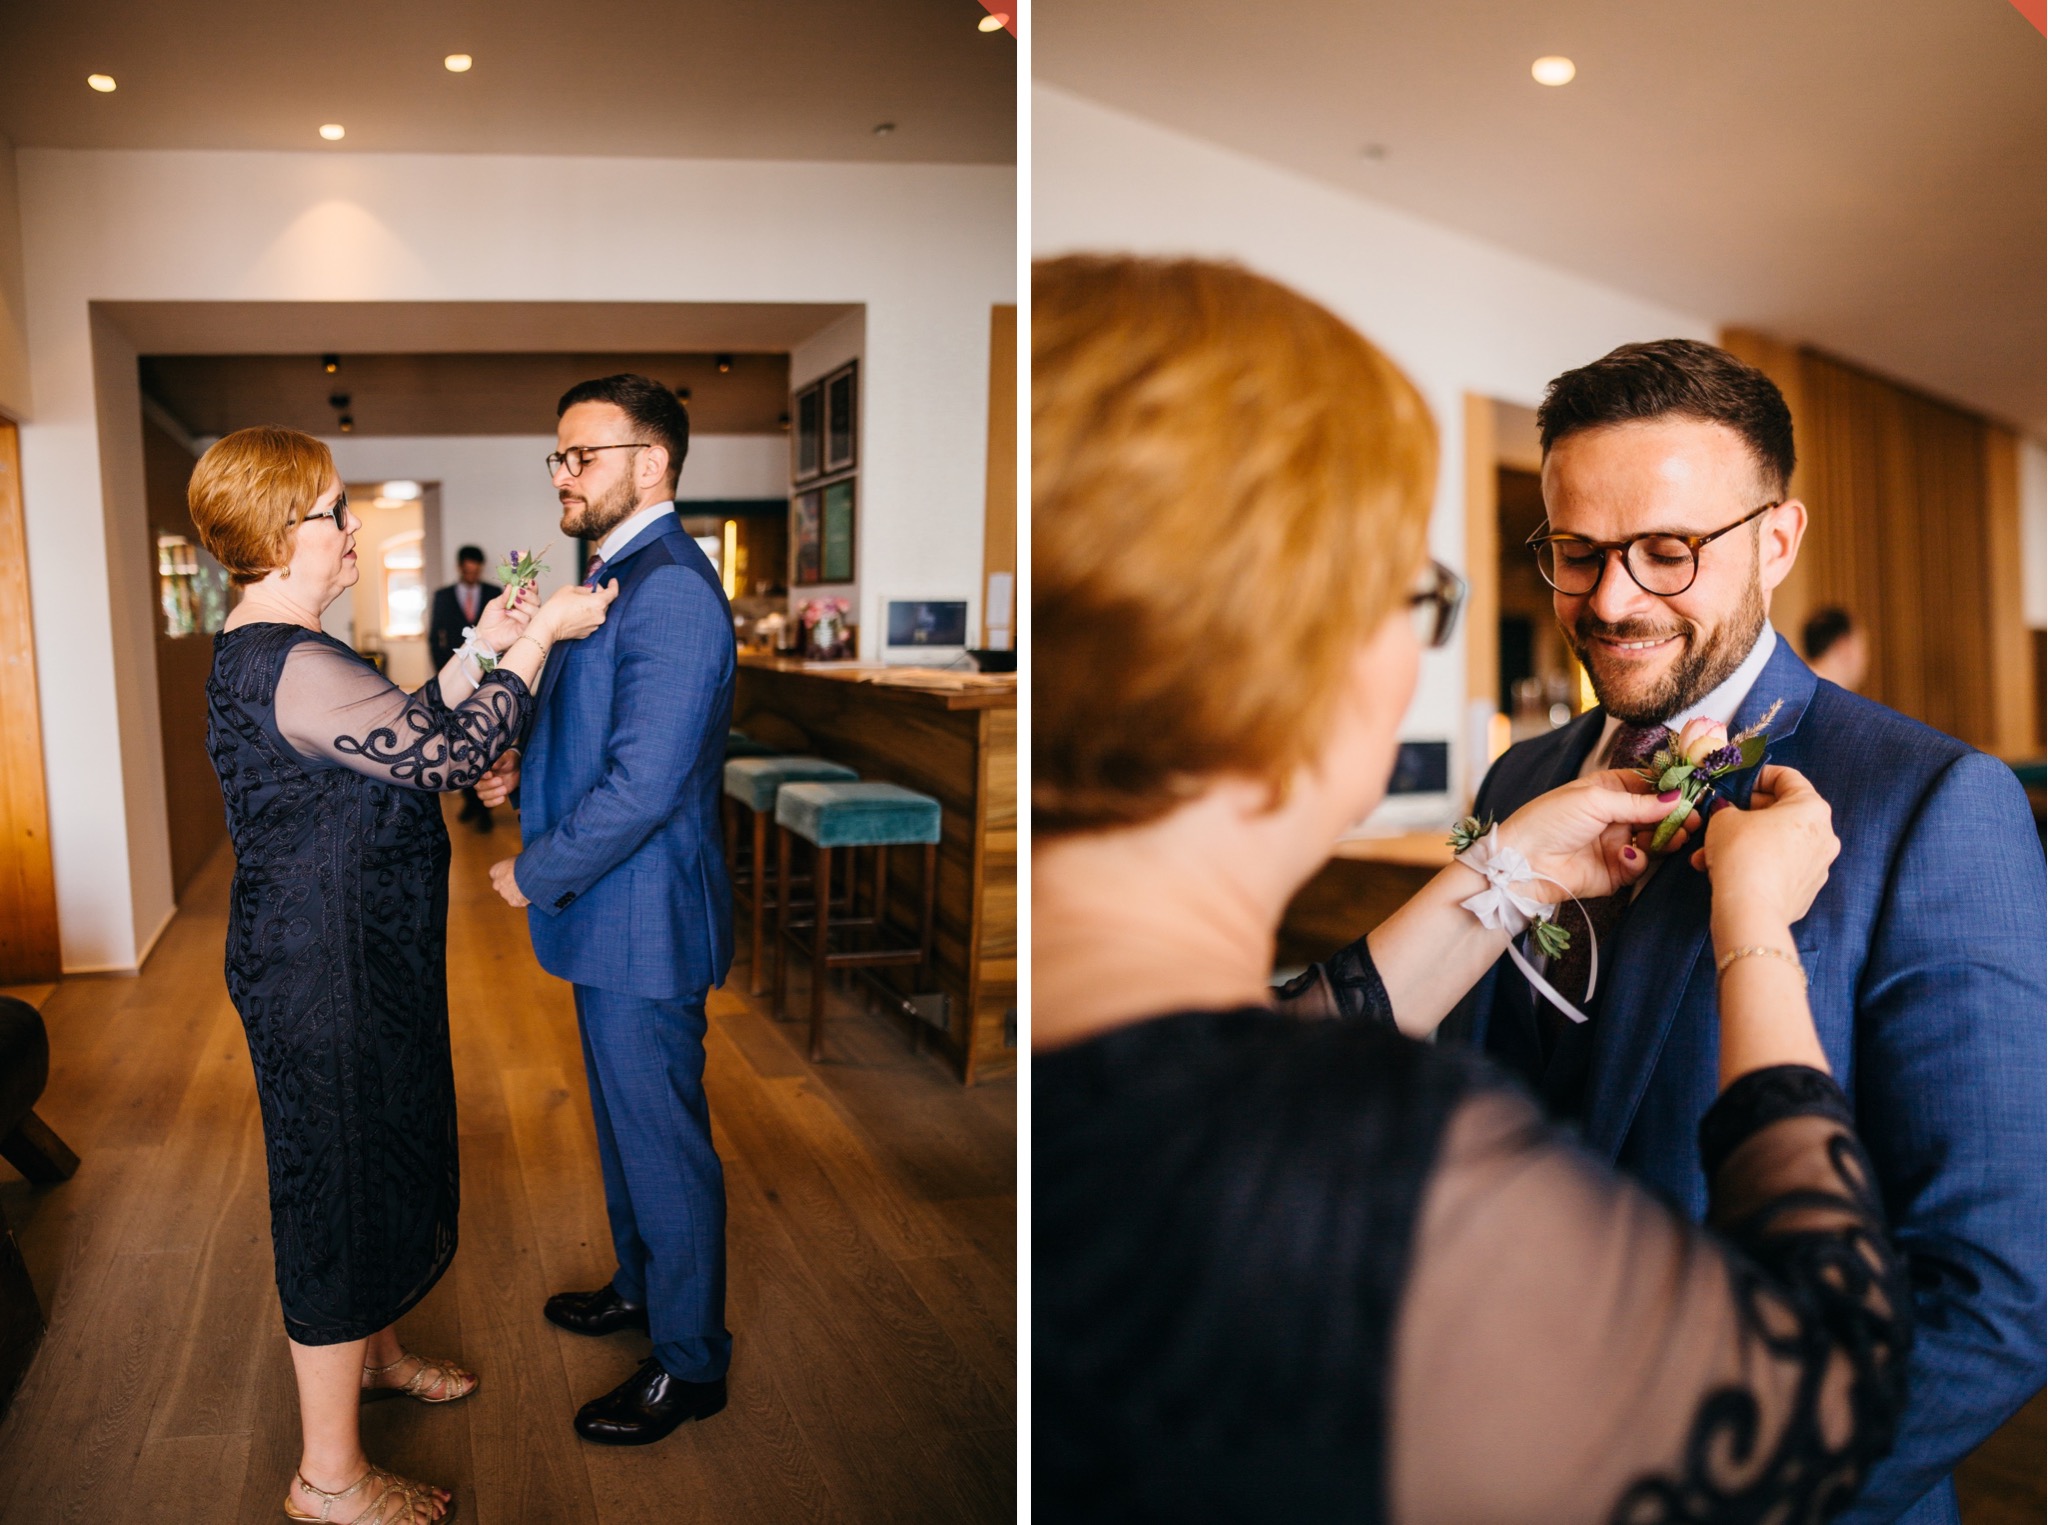 The groom gets help with his boutonniere before the wedding.